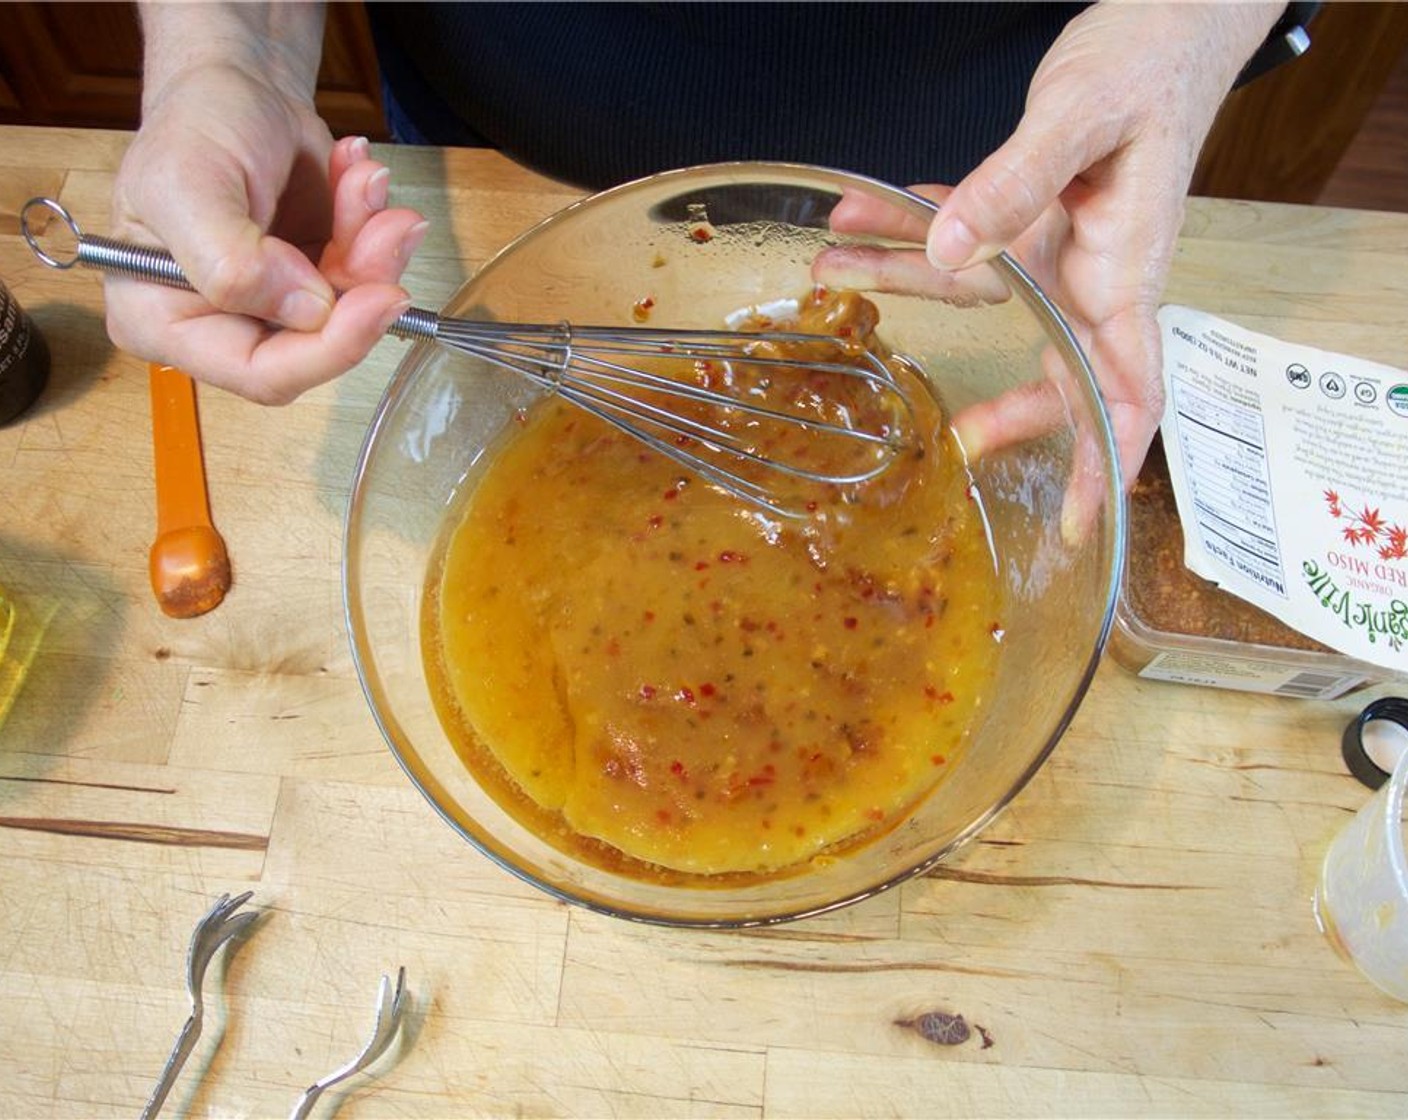 step 5 Whisk together the Rice Vinegar (3 fl oz), Just Jan's® Apricot Pepper Savory Spread (1/2 cup), Vegetable Oil (1/2 cup), Scallions (2), Red Miso Paste (1 tsp), Crushed Red Pepper Flakes (1 tsp) and Serrano Chili (1).